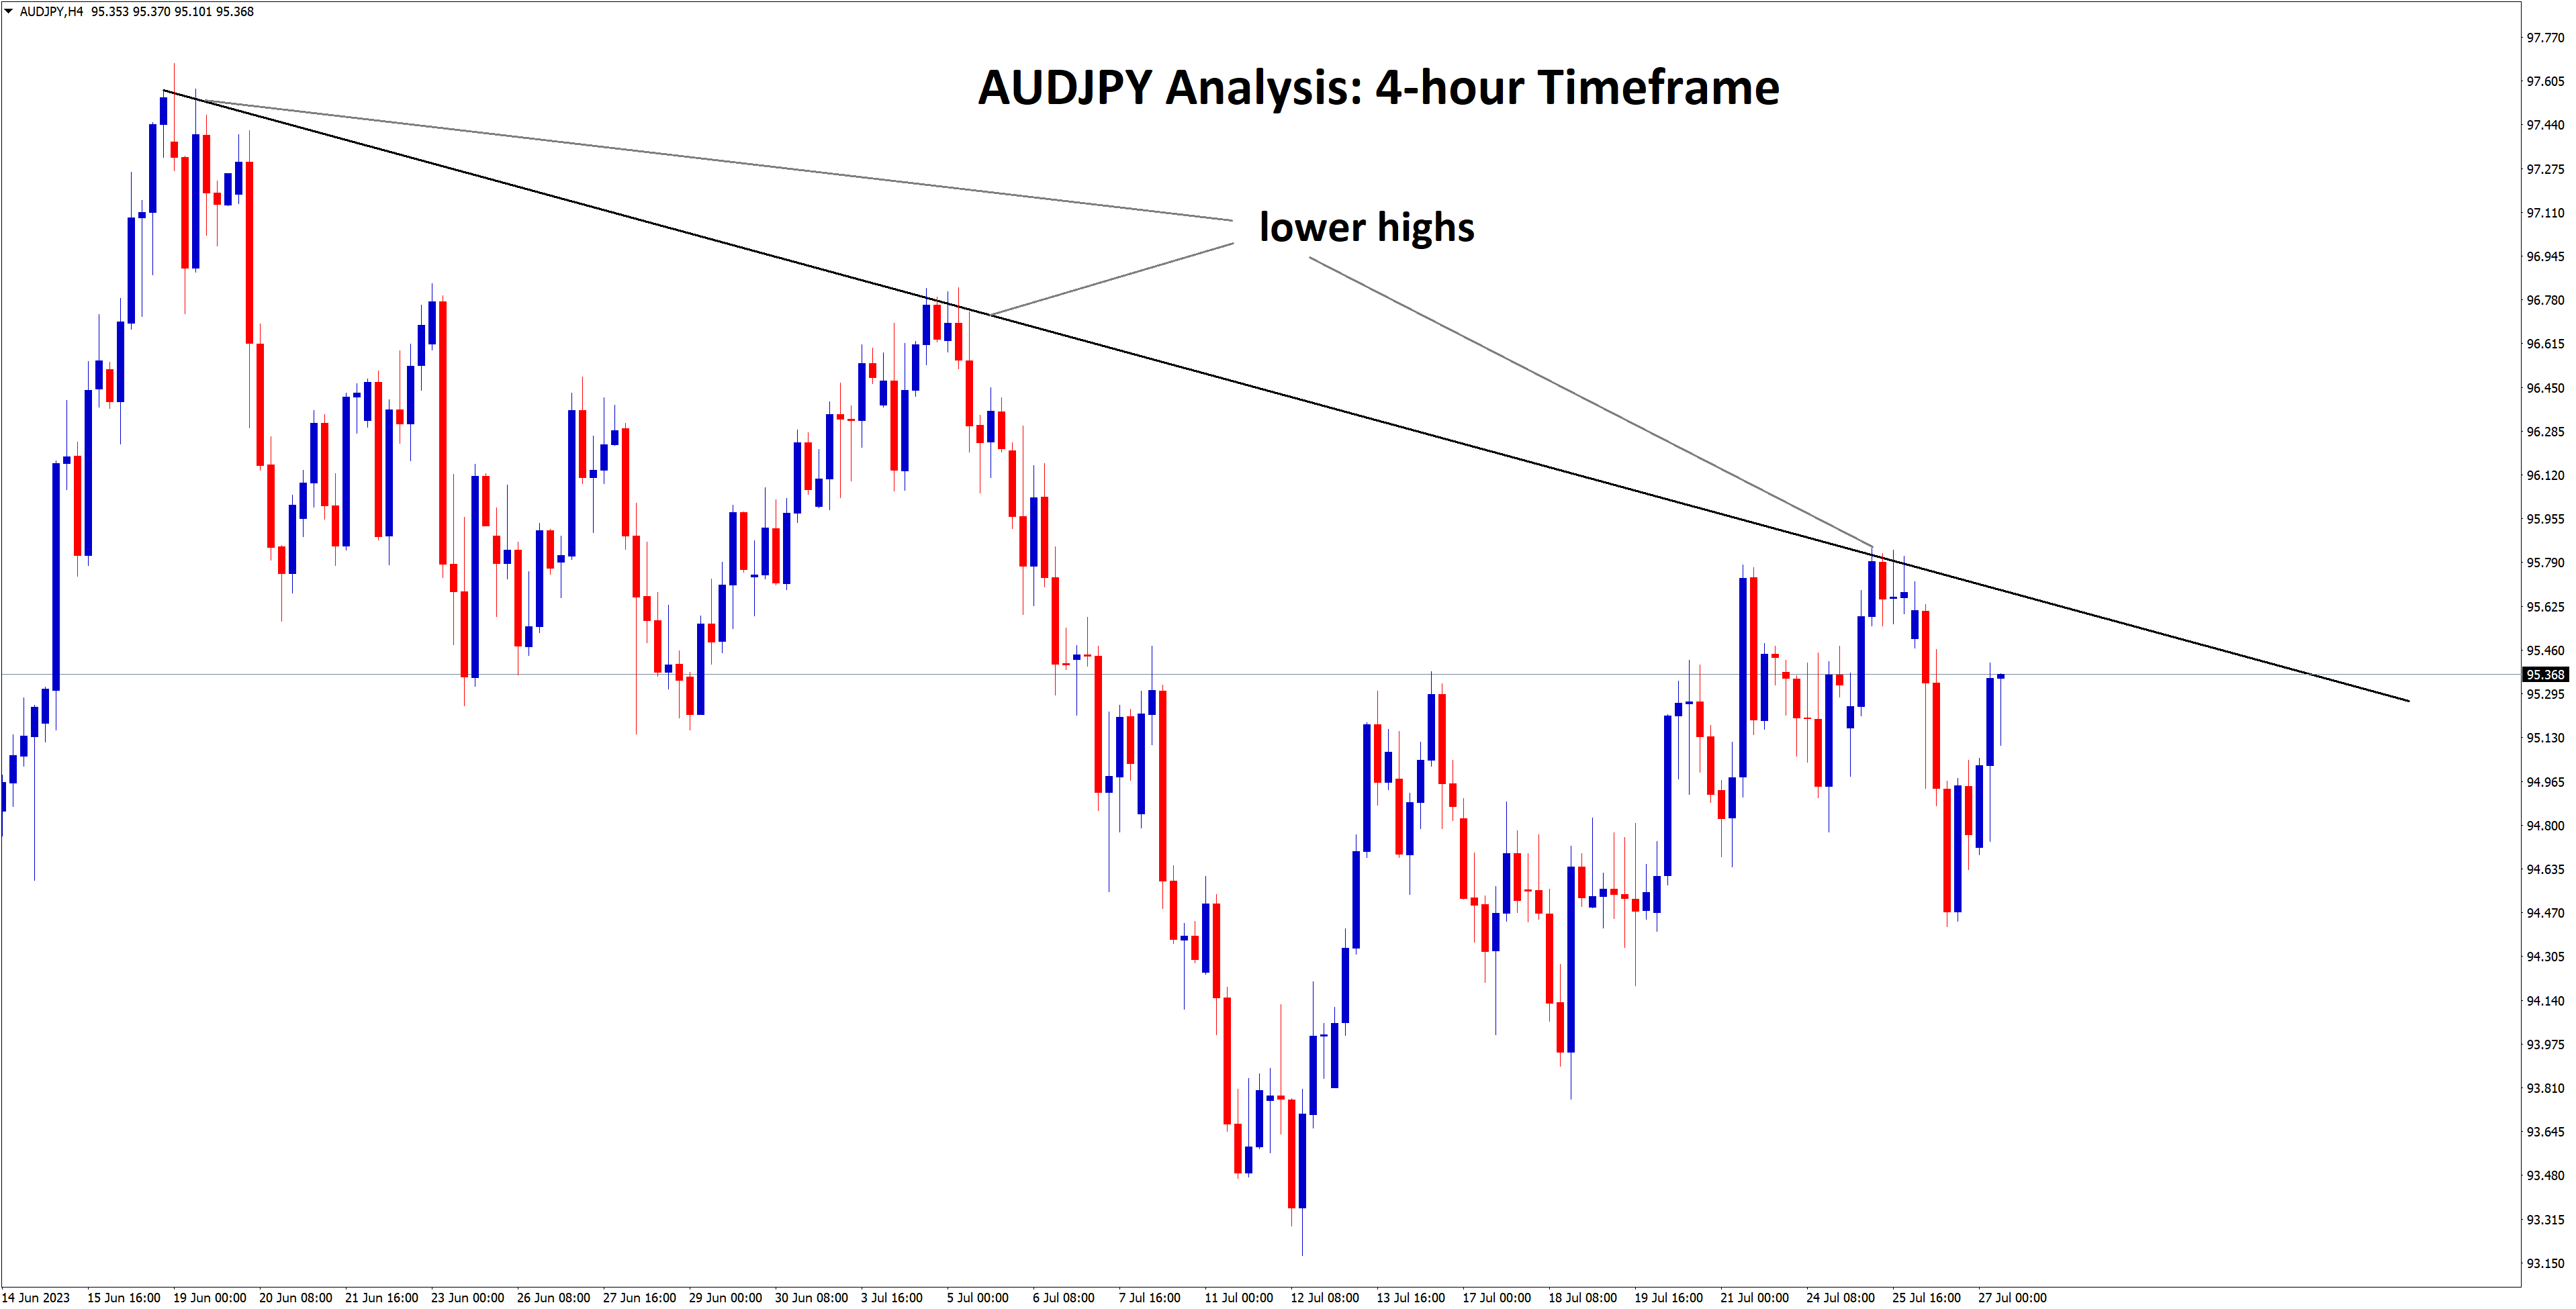 audjpy falling from the lower high area